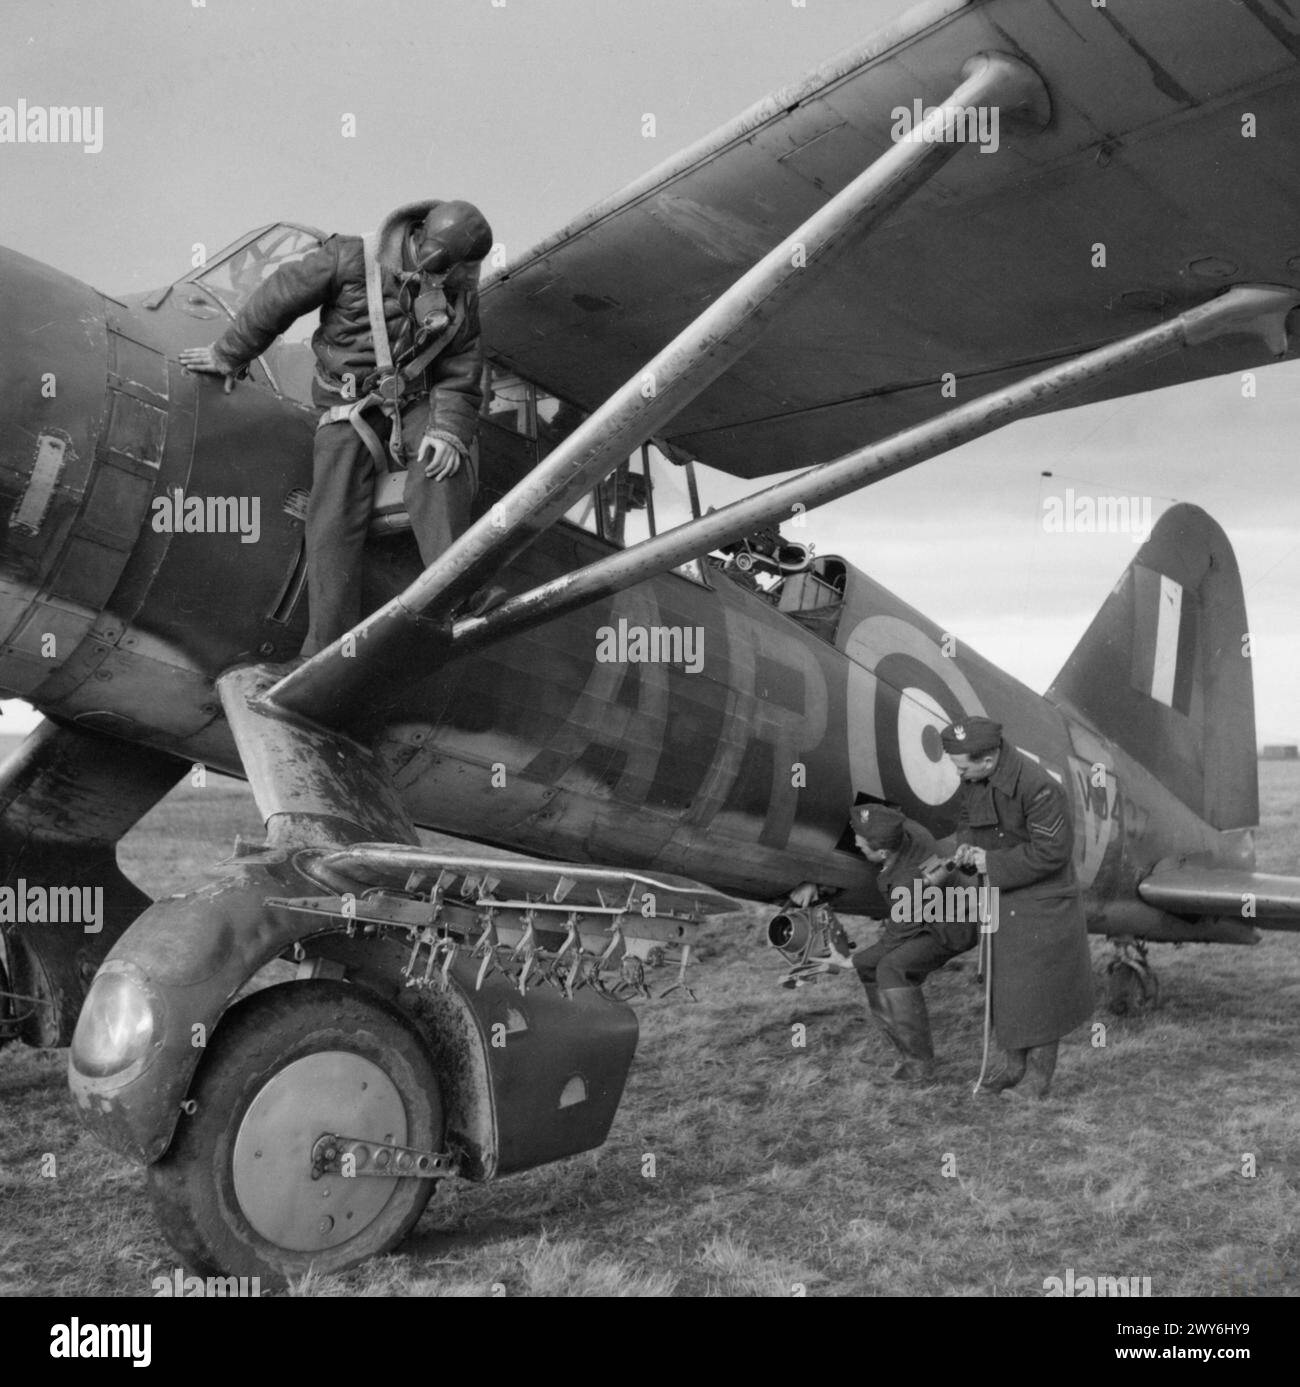 THE POLISH AIR FORCE IN BRITAIN, 1940-1947 - Ground crew remove a Type F.24 camera from Westland Lysander Mark IIIA, V9437 'AR-V', of No. 309 Polish Fighter-Reconnaissance Squadron (part of the RAF Army Cooperation Command), at Dunino, Fife, following a photo reconnaissance sortie. , Polish Air Force, Polish Air Force, 309 'Land of Czerwień' Fighter-Reconnaissance Squadron, Royal Air Force, Station, Calveley Stock Photo